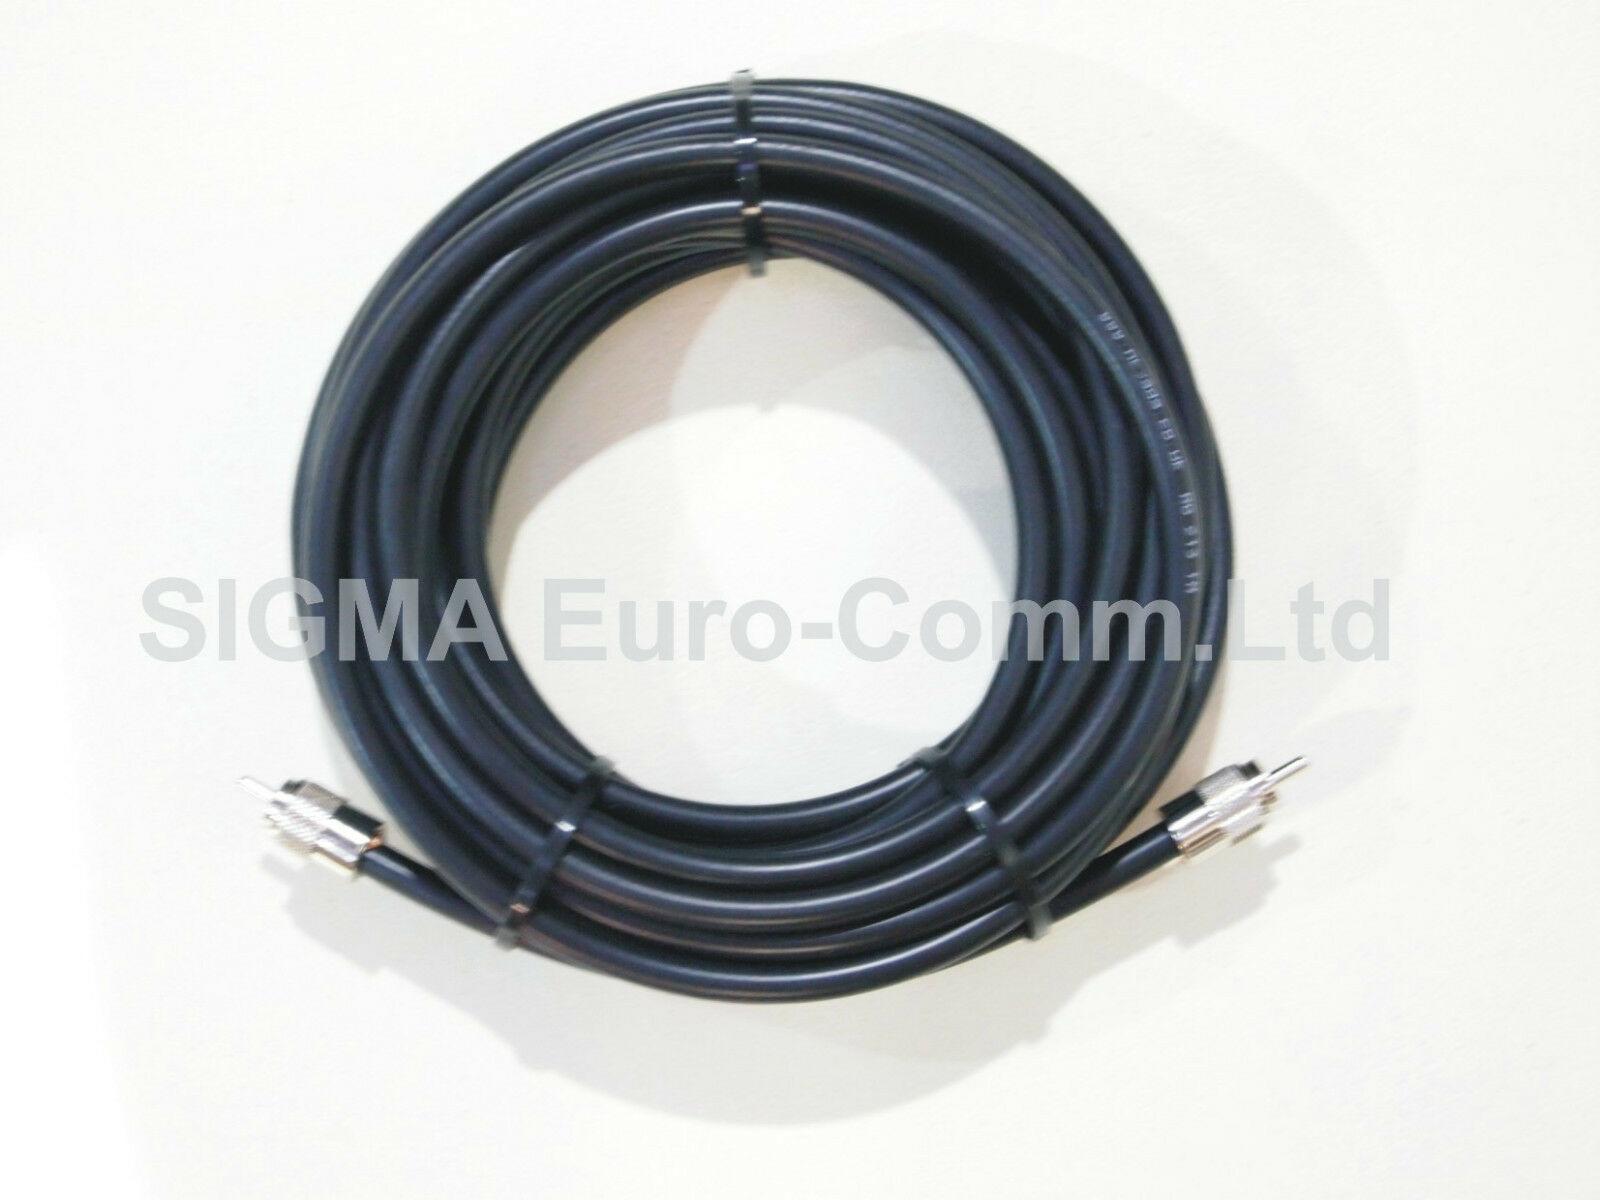 Sigma RG213 Low Loss 50 Ohm Coaxial Cable 20m Fitted With 2 x PL259 Male Connectors